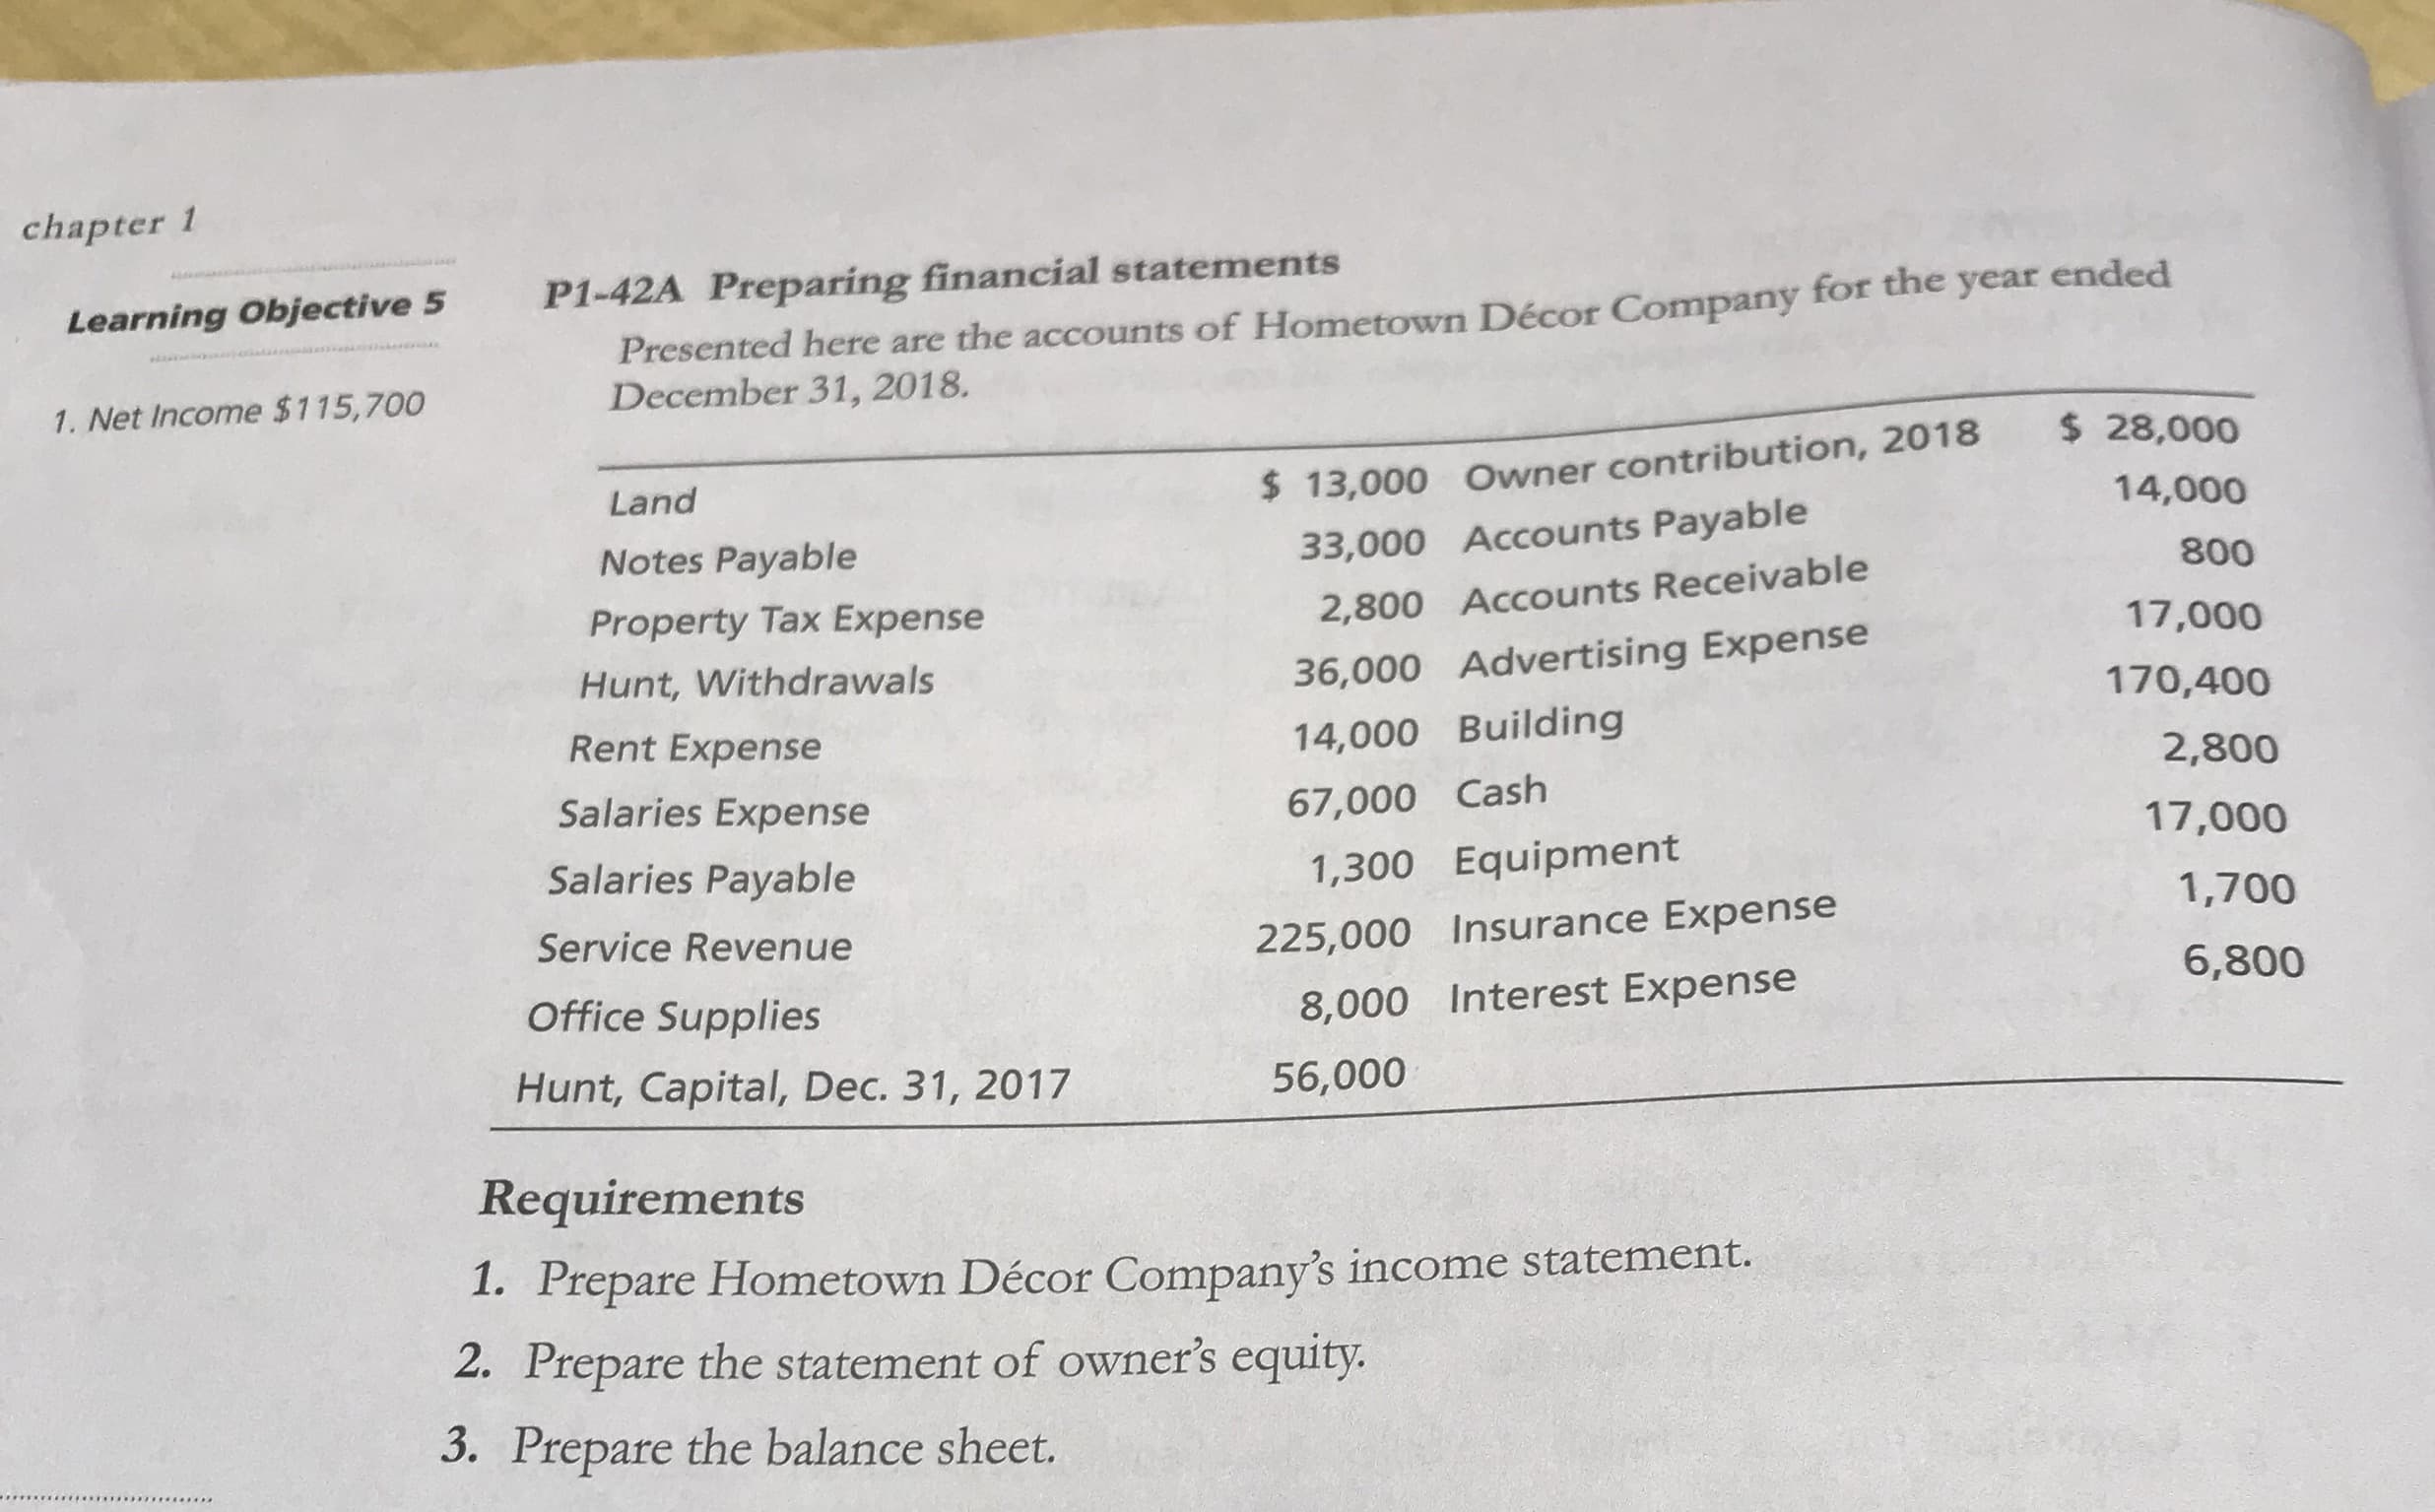 tive 5
P1-42A Preparing financial statements
for the year ended
Presented here are the accounts of Hometown Décor Company
December 31, 2018.
E,700
$ 28,000
Land
$ 13,000 Owner contribution, 2018
14,000
Notes Payable
33,000 Accounts Payable
800
Property Tax Expense
2,800 Accounts Receivable
17,000
Hunt, Withdrawals
36,000 Advertising Expense
170,400
Rent Expense
14,000 Building
2,800
Salaries Expense
67,000 Cash
17,000
Salaries Payable
1,300 Equipment
1,700
Service Revenue
225,000 Insurance Expense
Office Supplies
8,000 Interest Expense
6,800
Hunt, Capital, Dec. 31, 2017
56,000
Requirements
1. Prepare Hometown Décor Company's income statement.
2. Prepare the statement of owner's equity.
3. Prepare the balance sheet.
